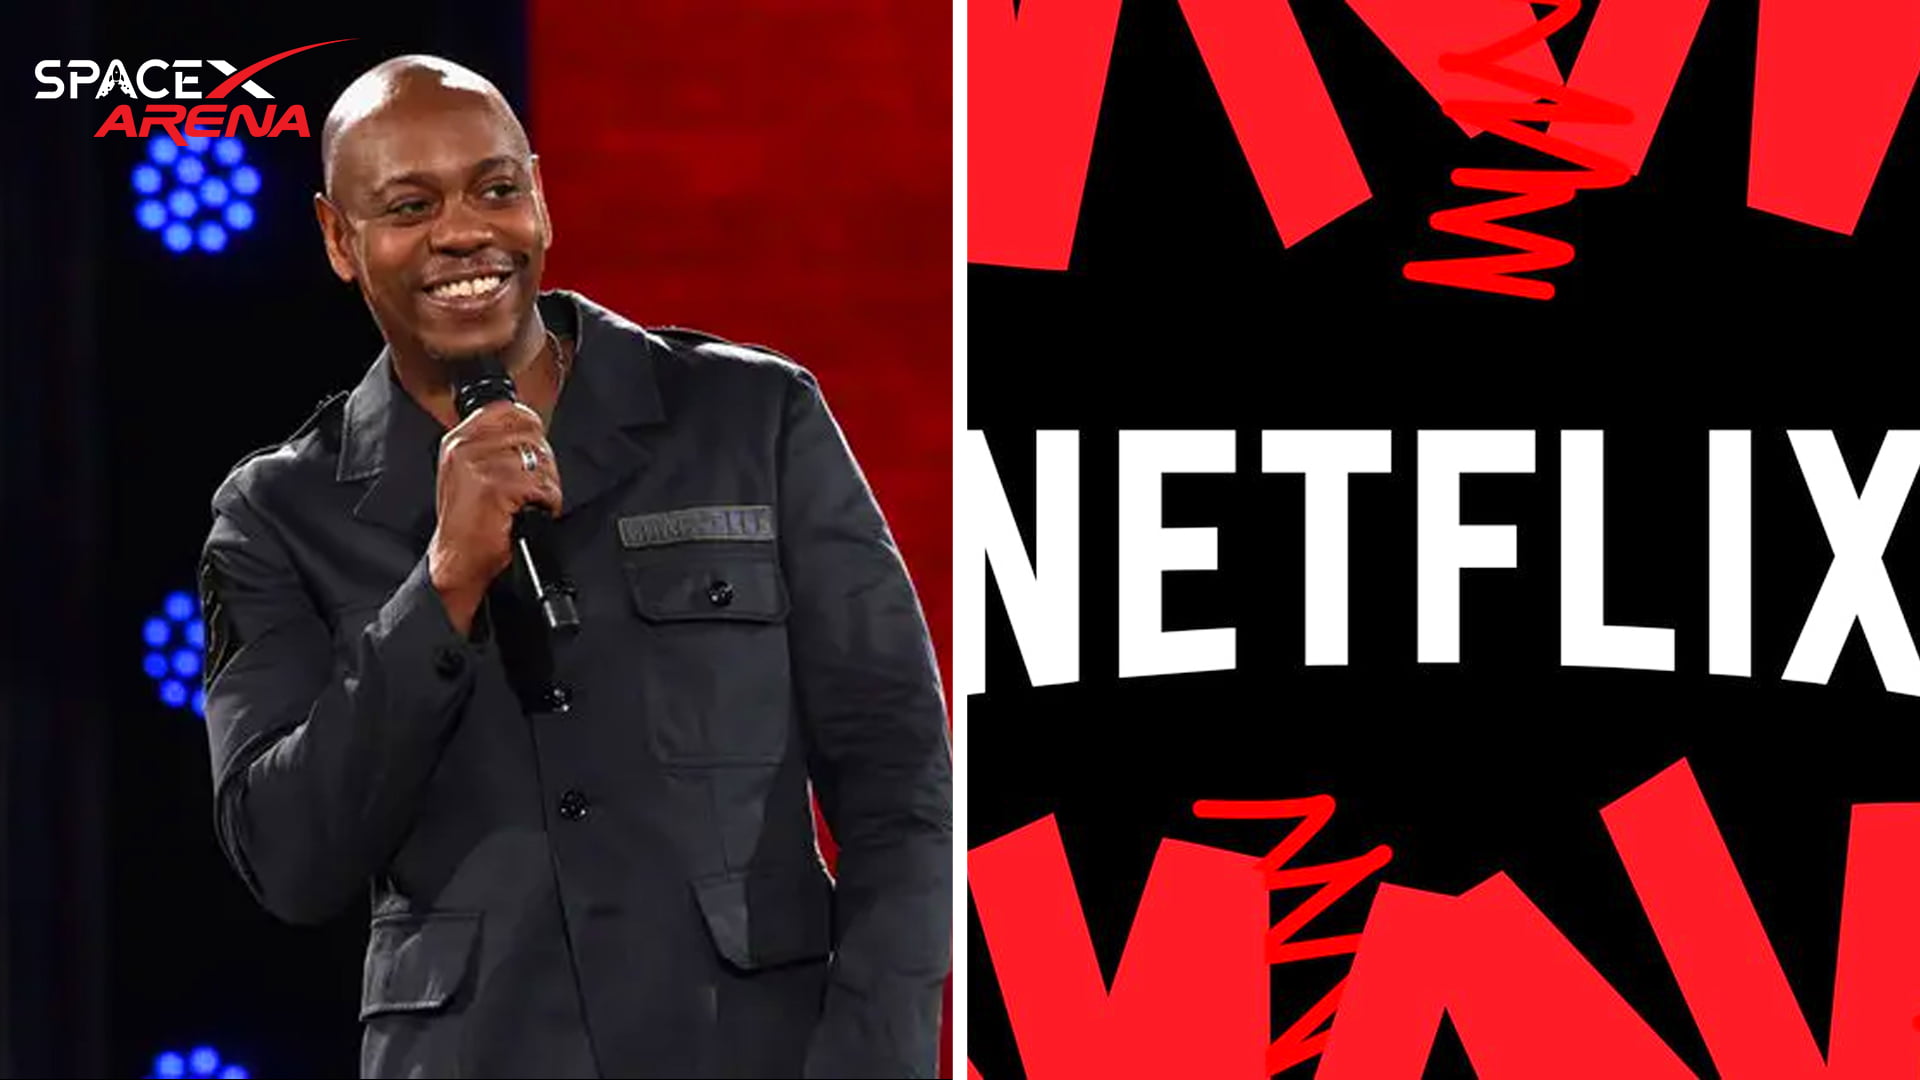 CANCEL CULTURE, COMEDY AND SOCIETY, DAVE CHAPPELLE, LGBTQ+ RIGHTS, MEDIA AND ETHICS, NETFLIX SPECIAL, STAND-UP COMEDY, THE DREAMER, TRANSGENDER JOKES CONTROVERSY